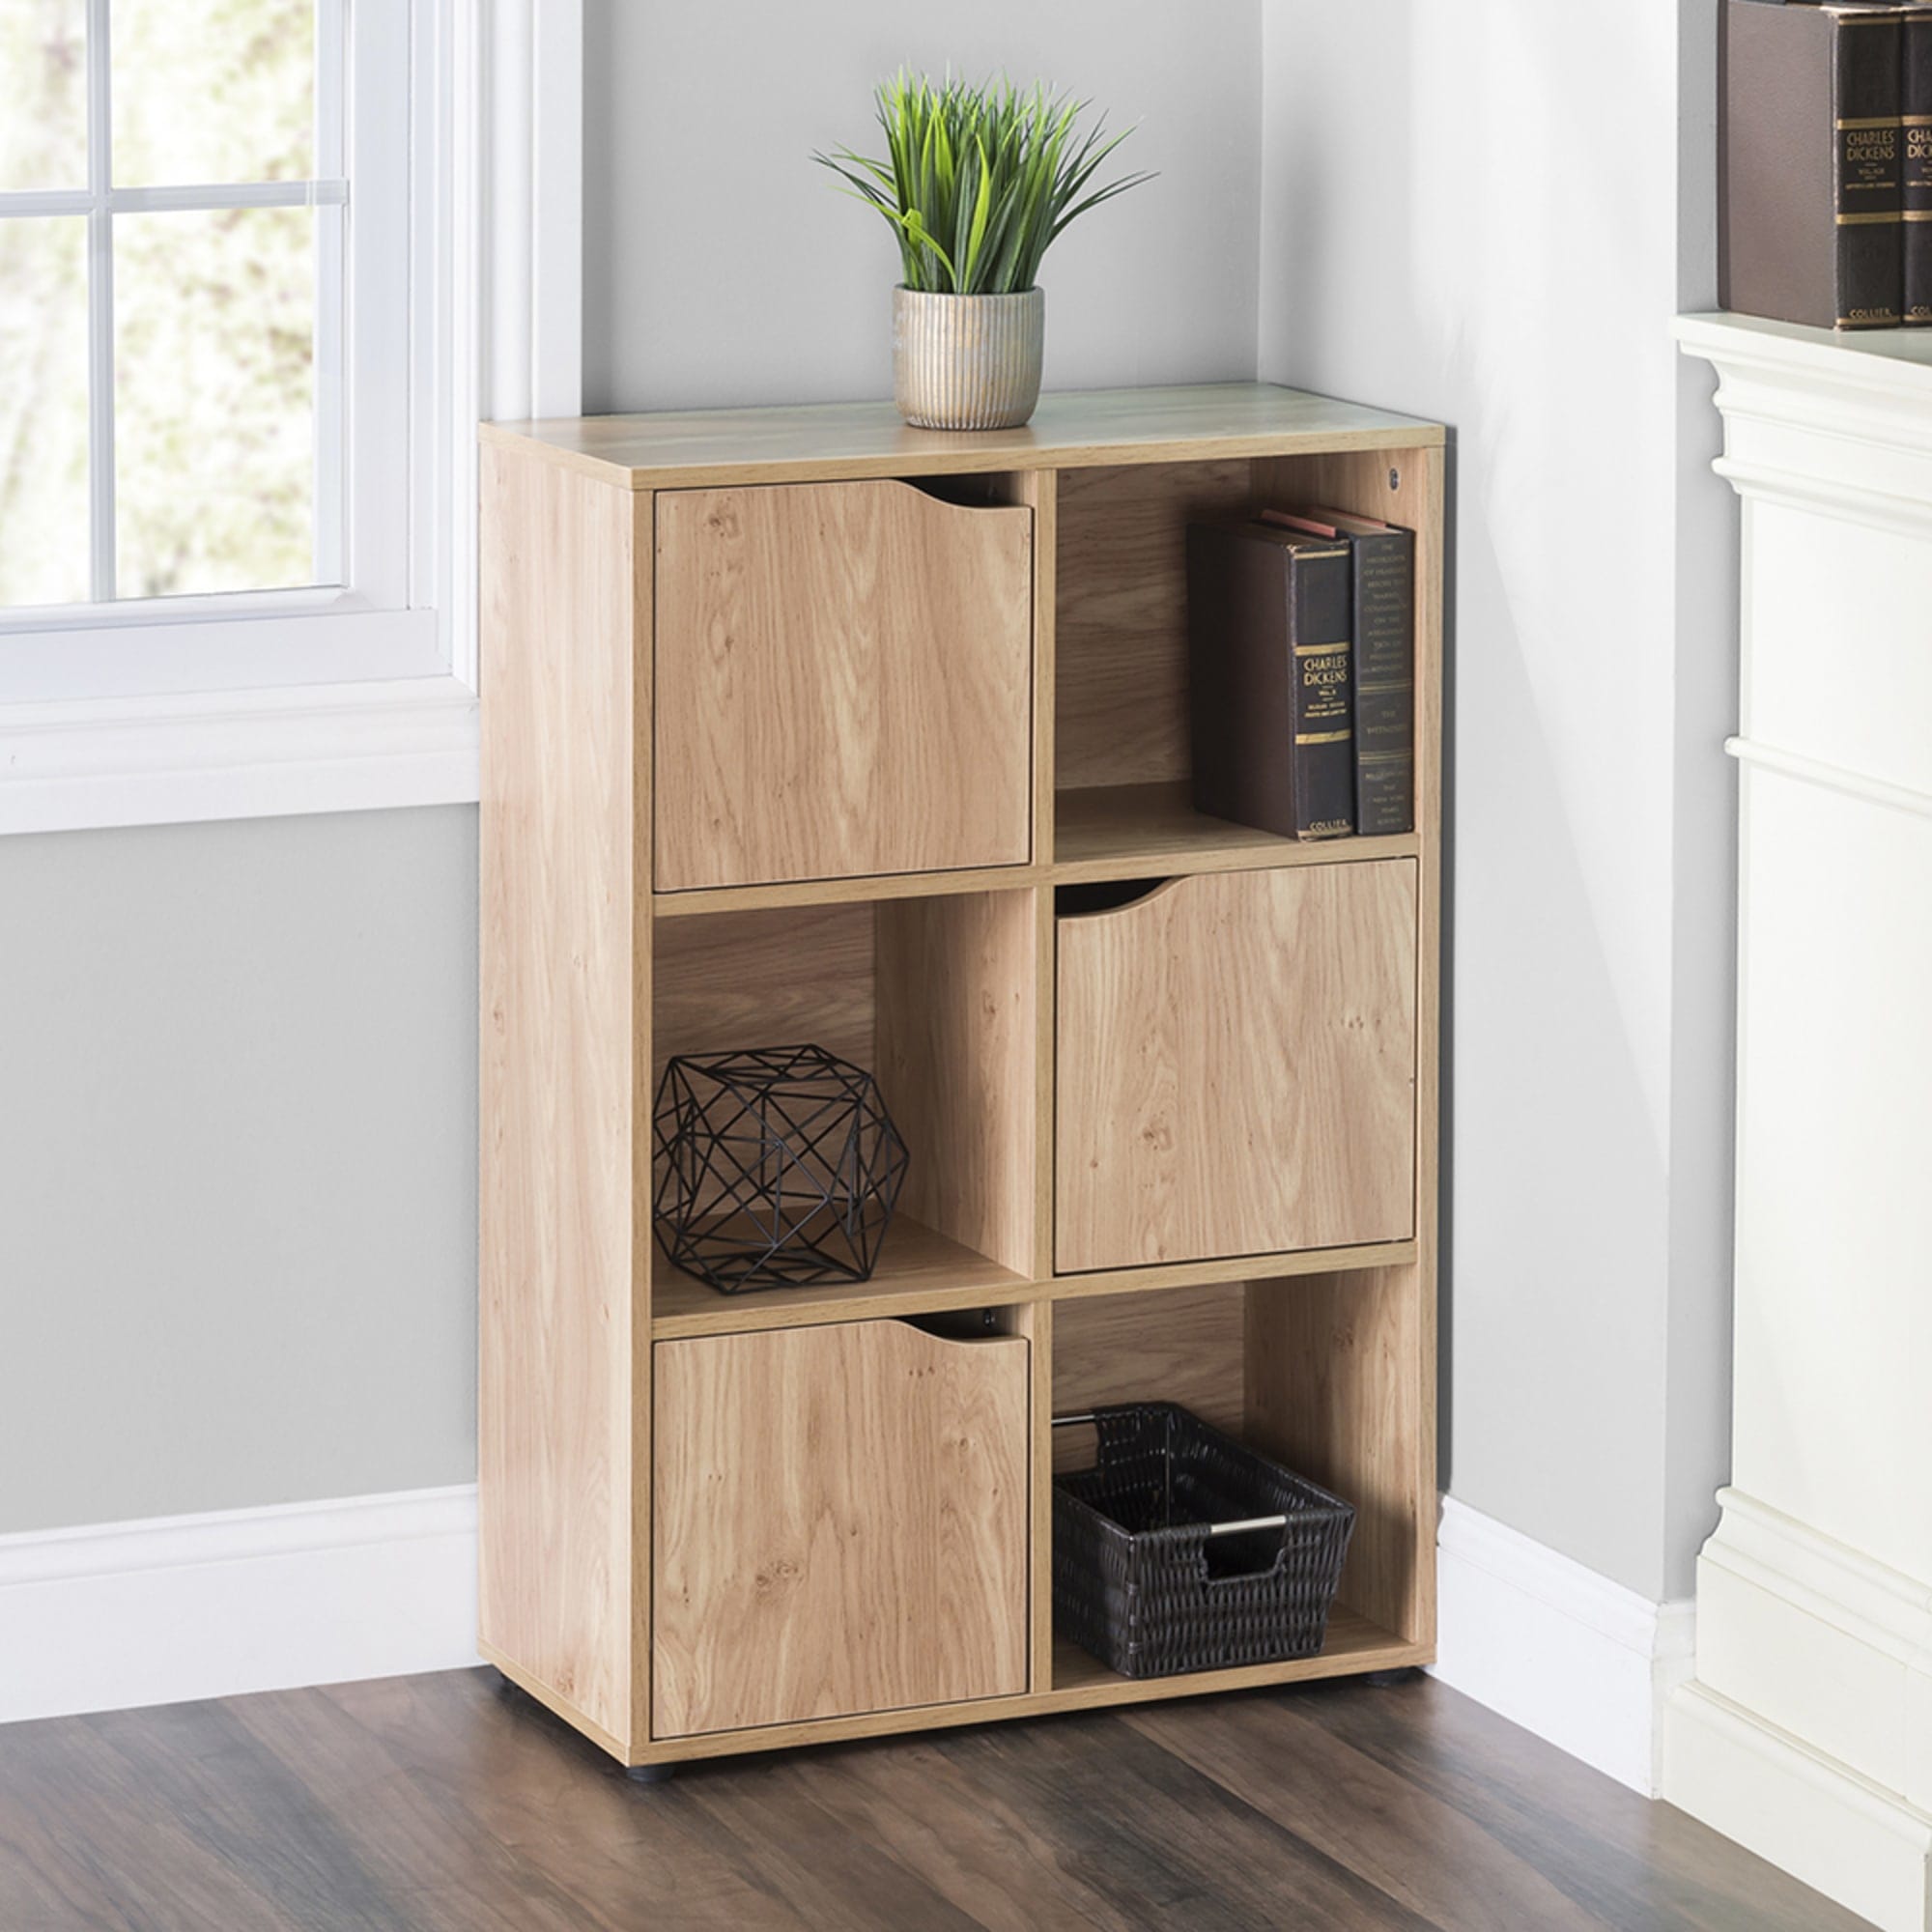 Home Basics 6 Cube MDF Storage Shelf with Doors, Natural $60.00 EACH, CASE PACK OF 1